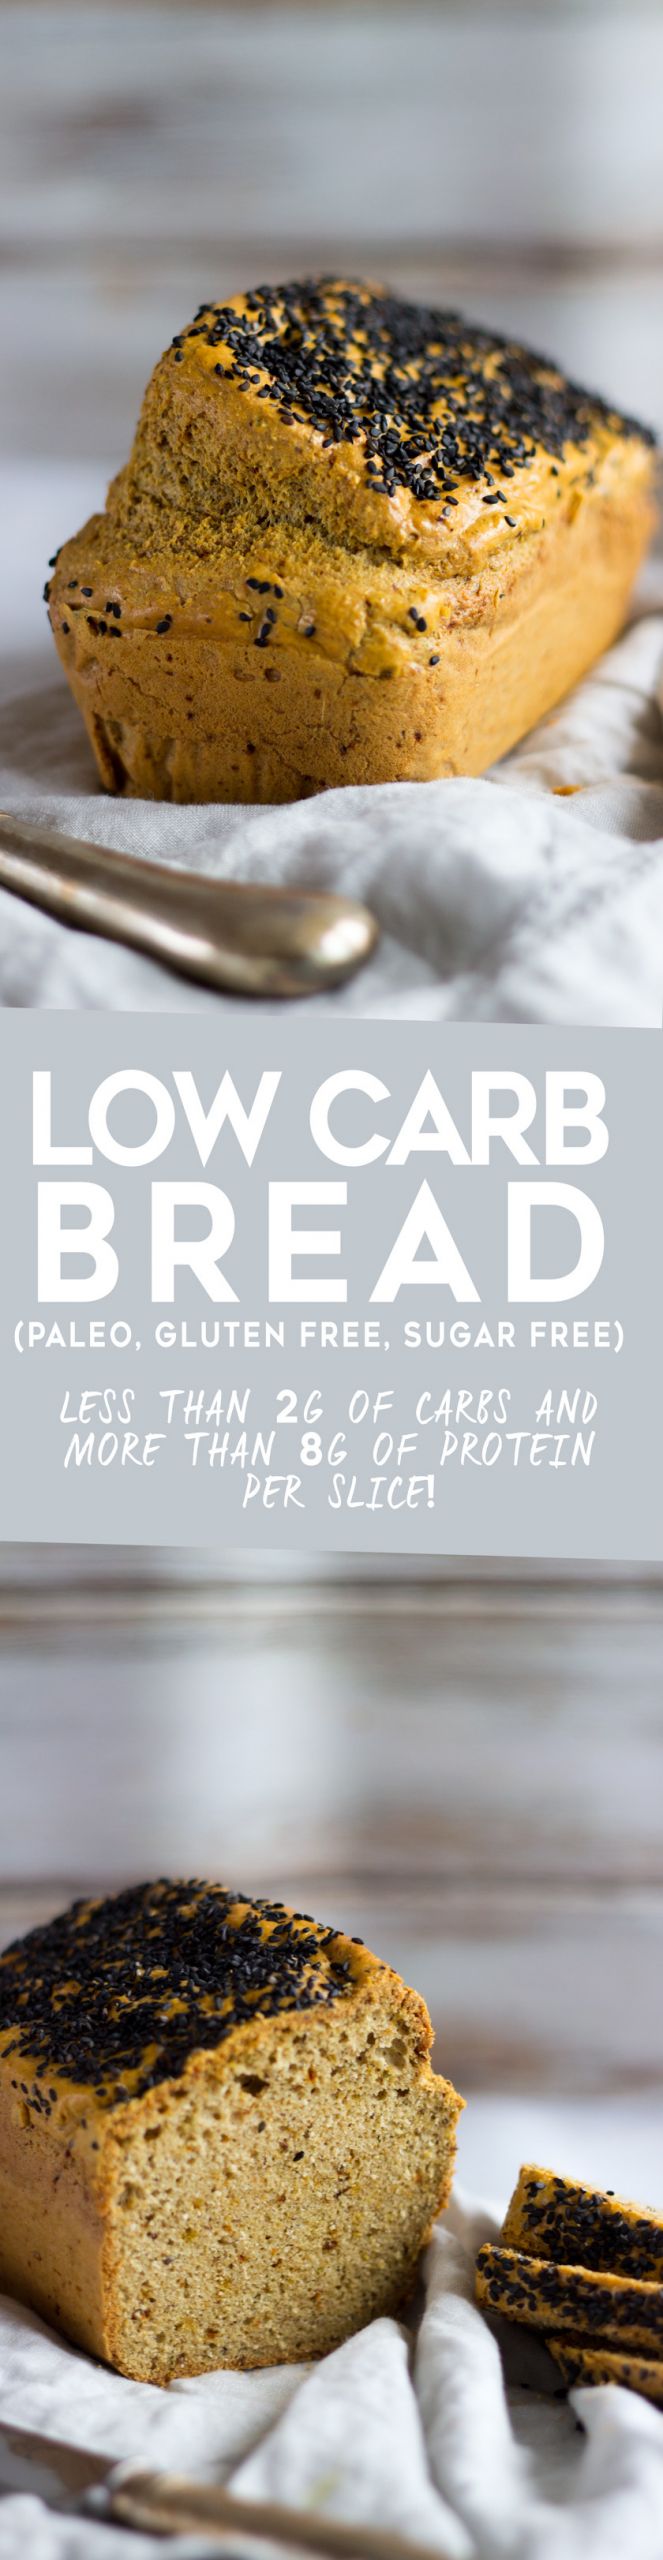 Low Carb Grain Free Bread
 Protein Grain Free Bread Low Carb Paleo Sprinkle of